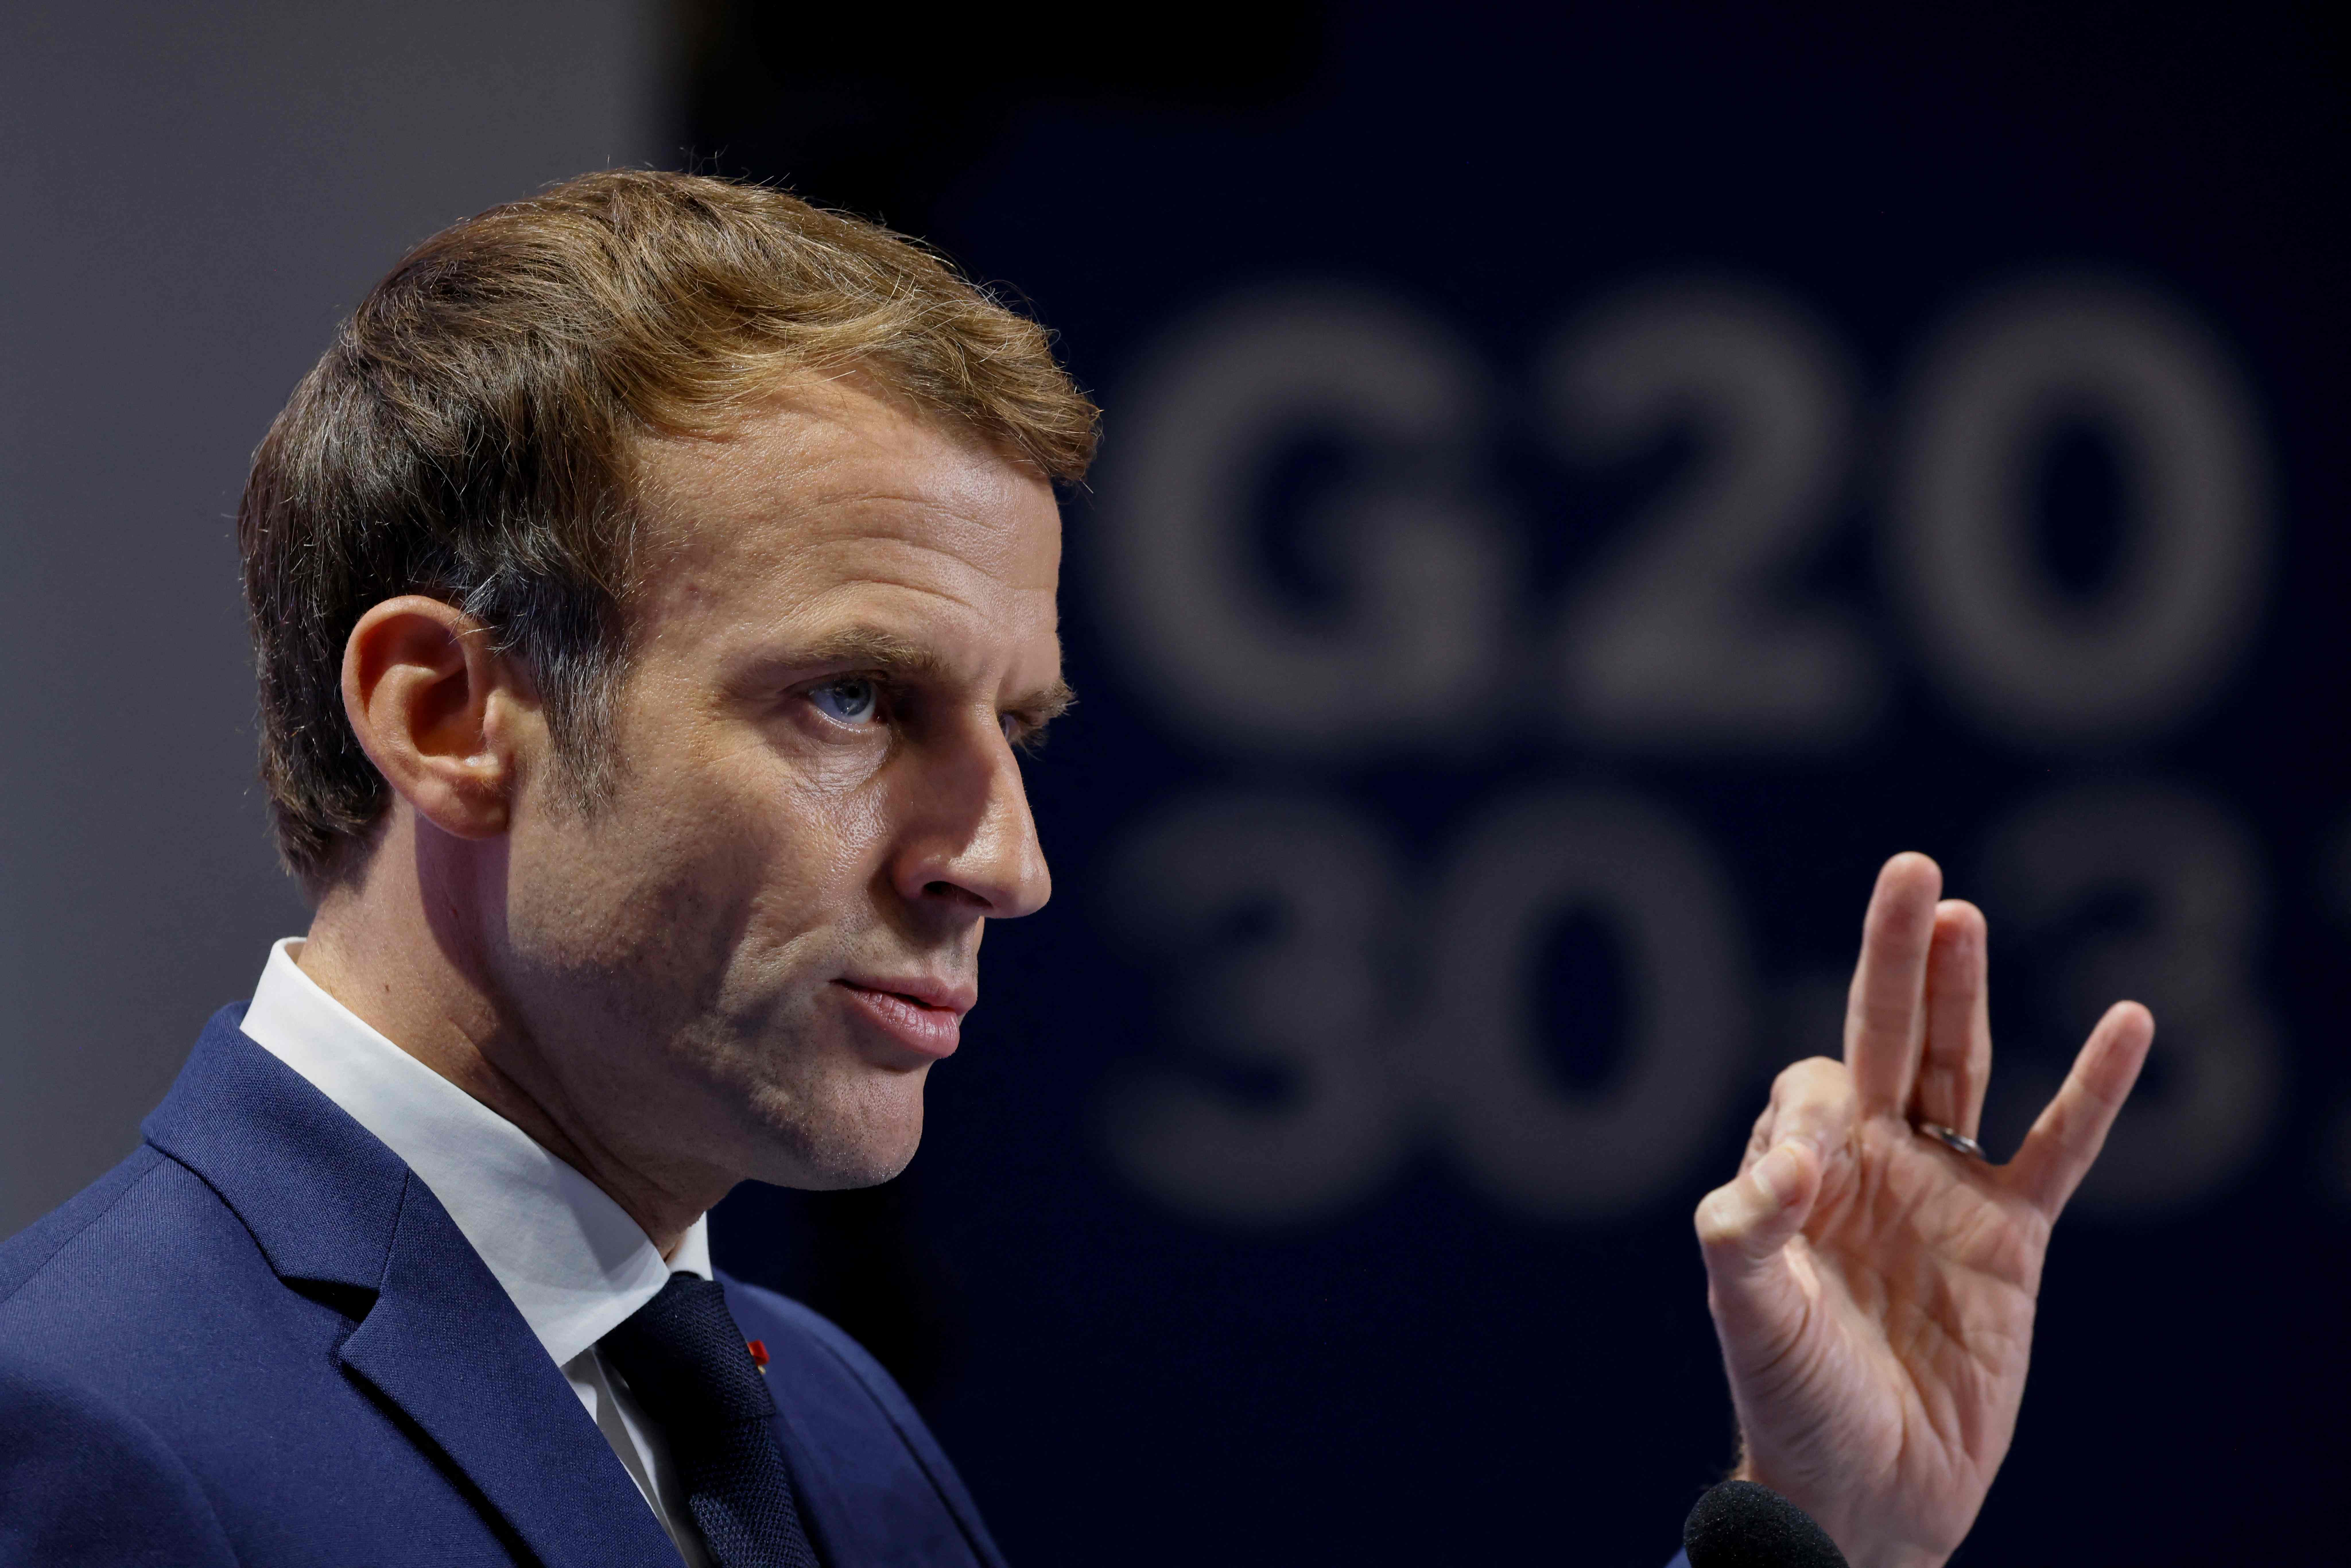 France’s President Emmanuel Macron at a G20 summit news conference in Rome on Sunday